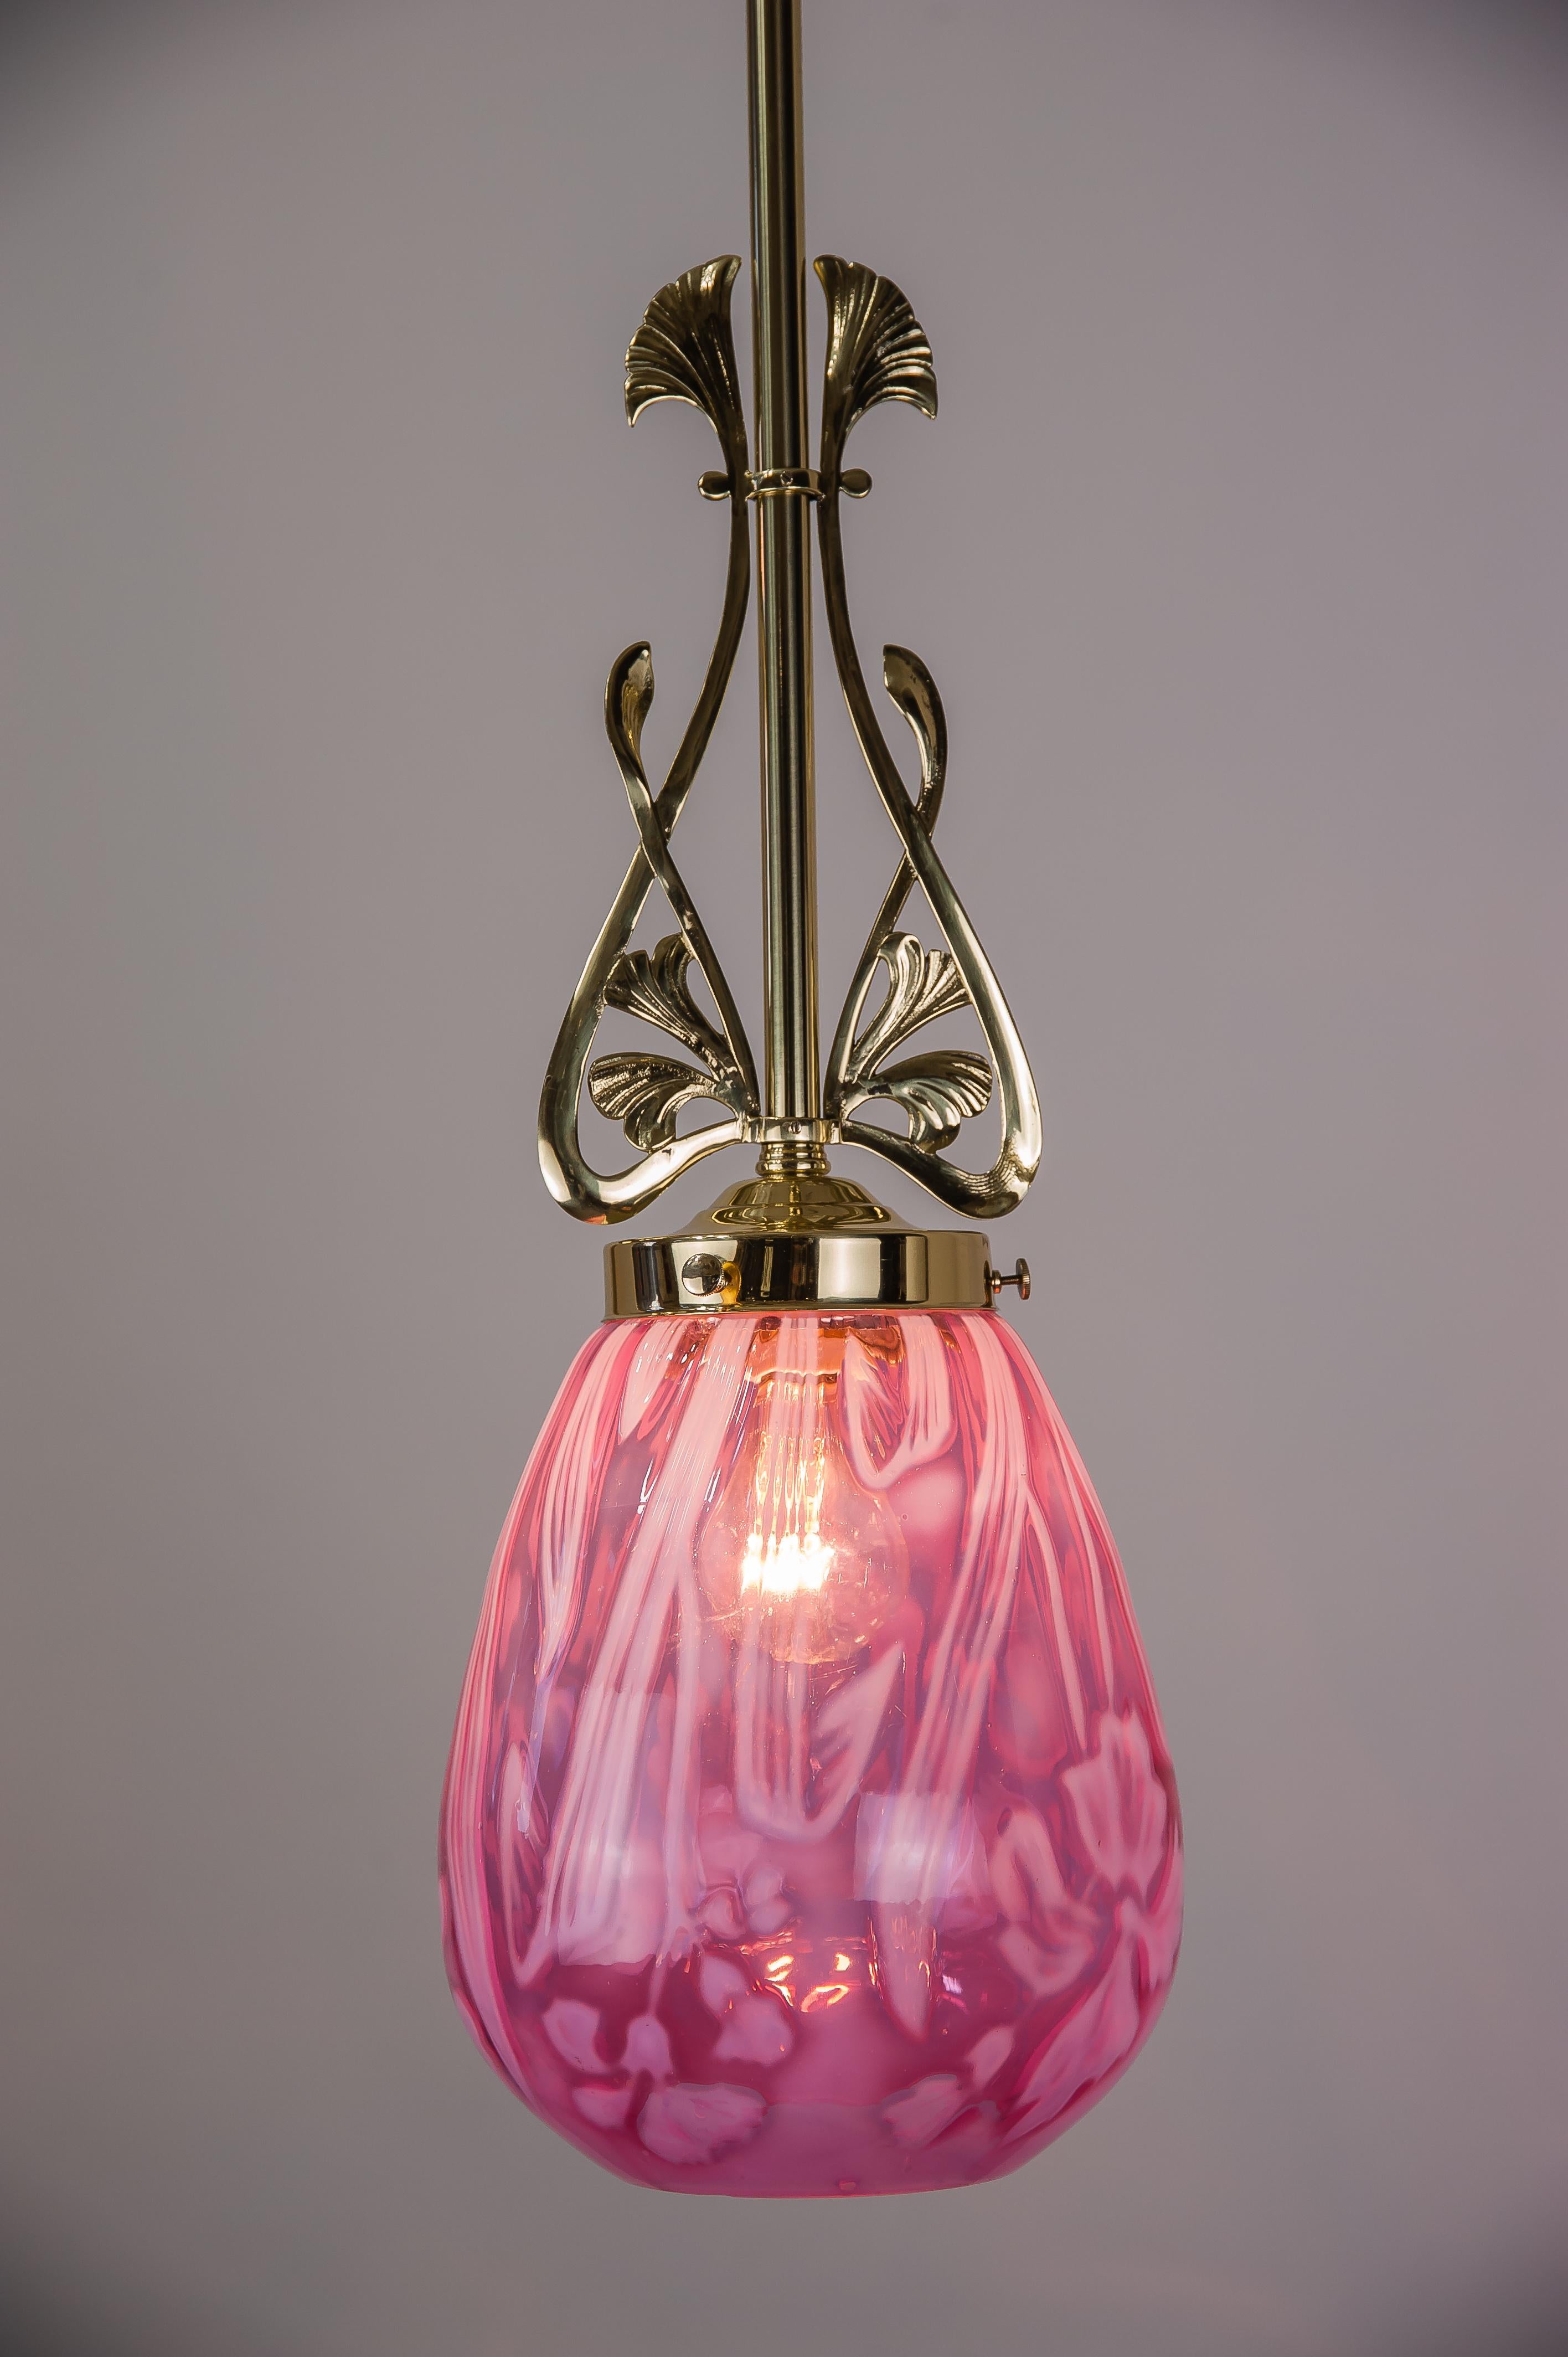 Early 20th Century Floral Jugendstil Pendant, circa 1905 with Original Glass Shade